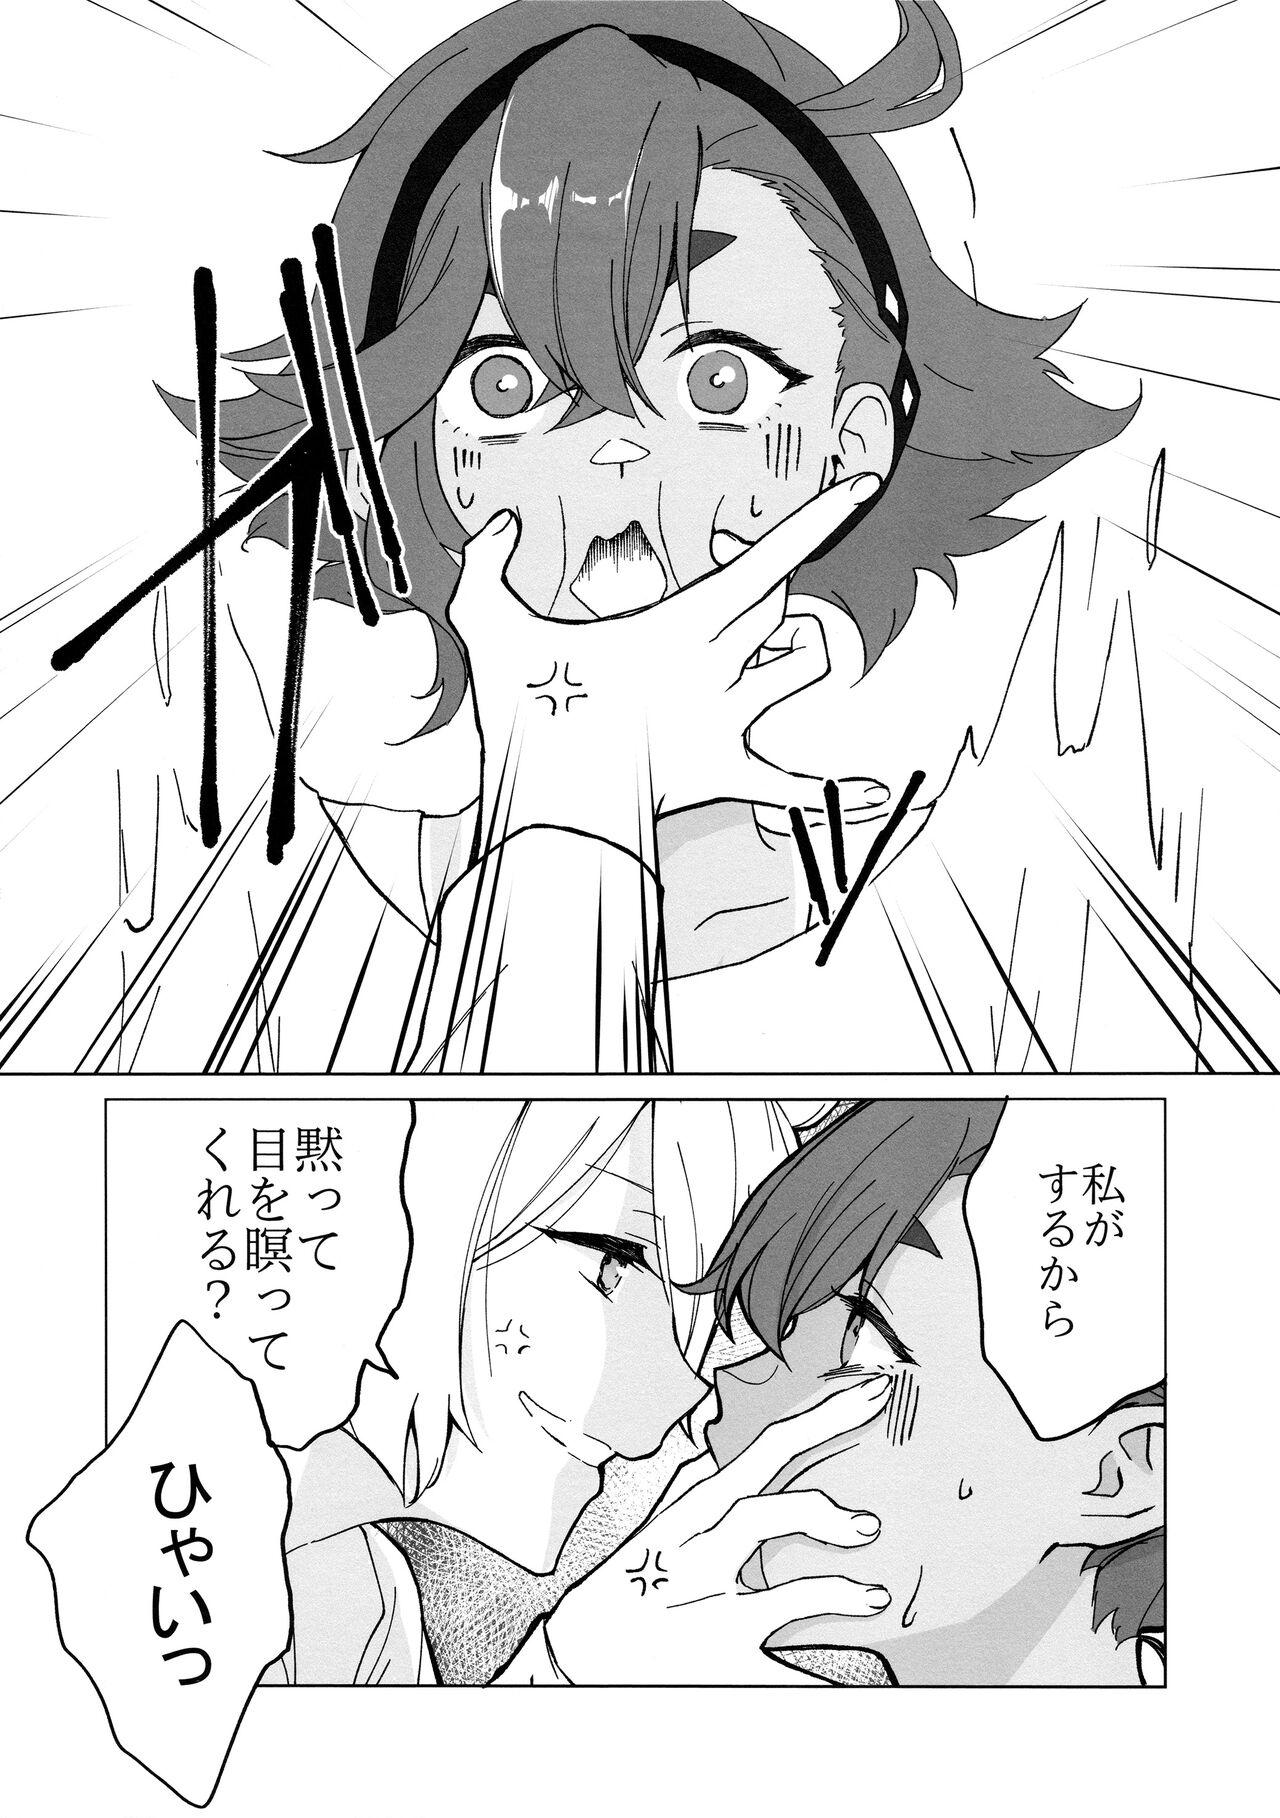 Office Kiss Kiss Kiss - Mobile suit gundam the witch from mercury Sperm - Page 6